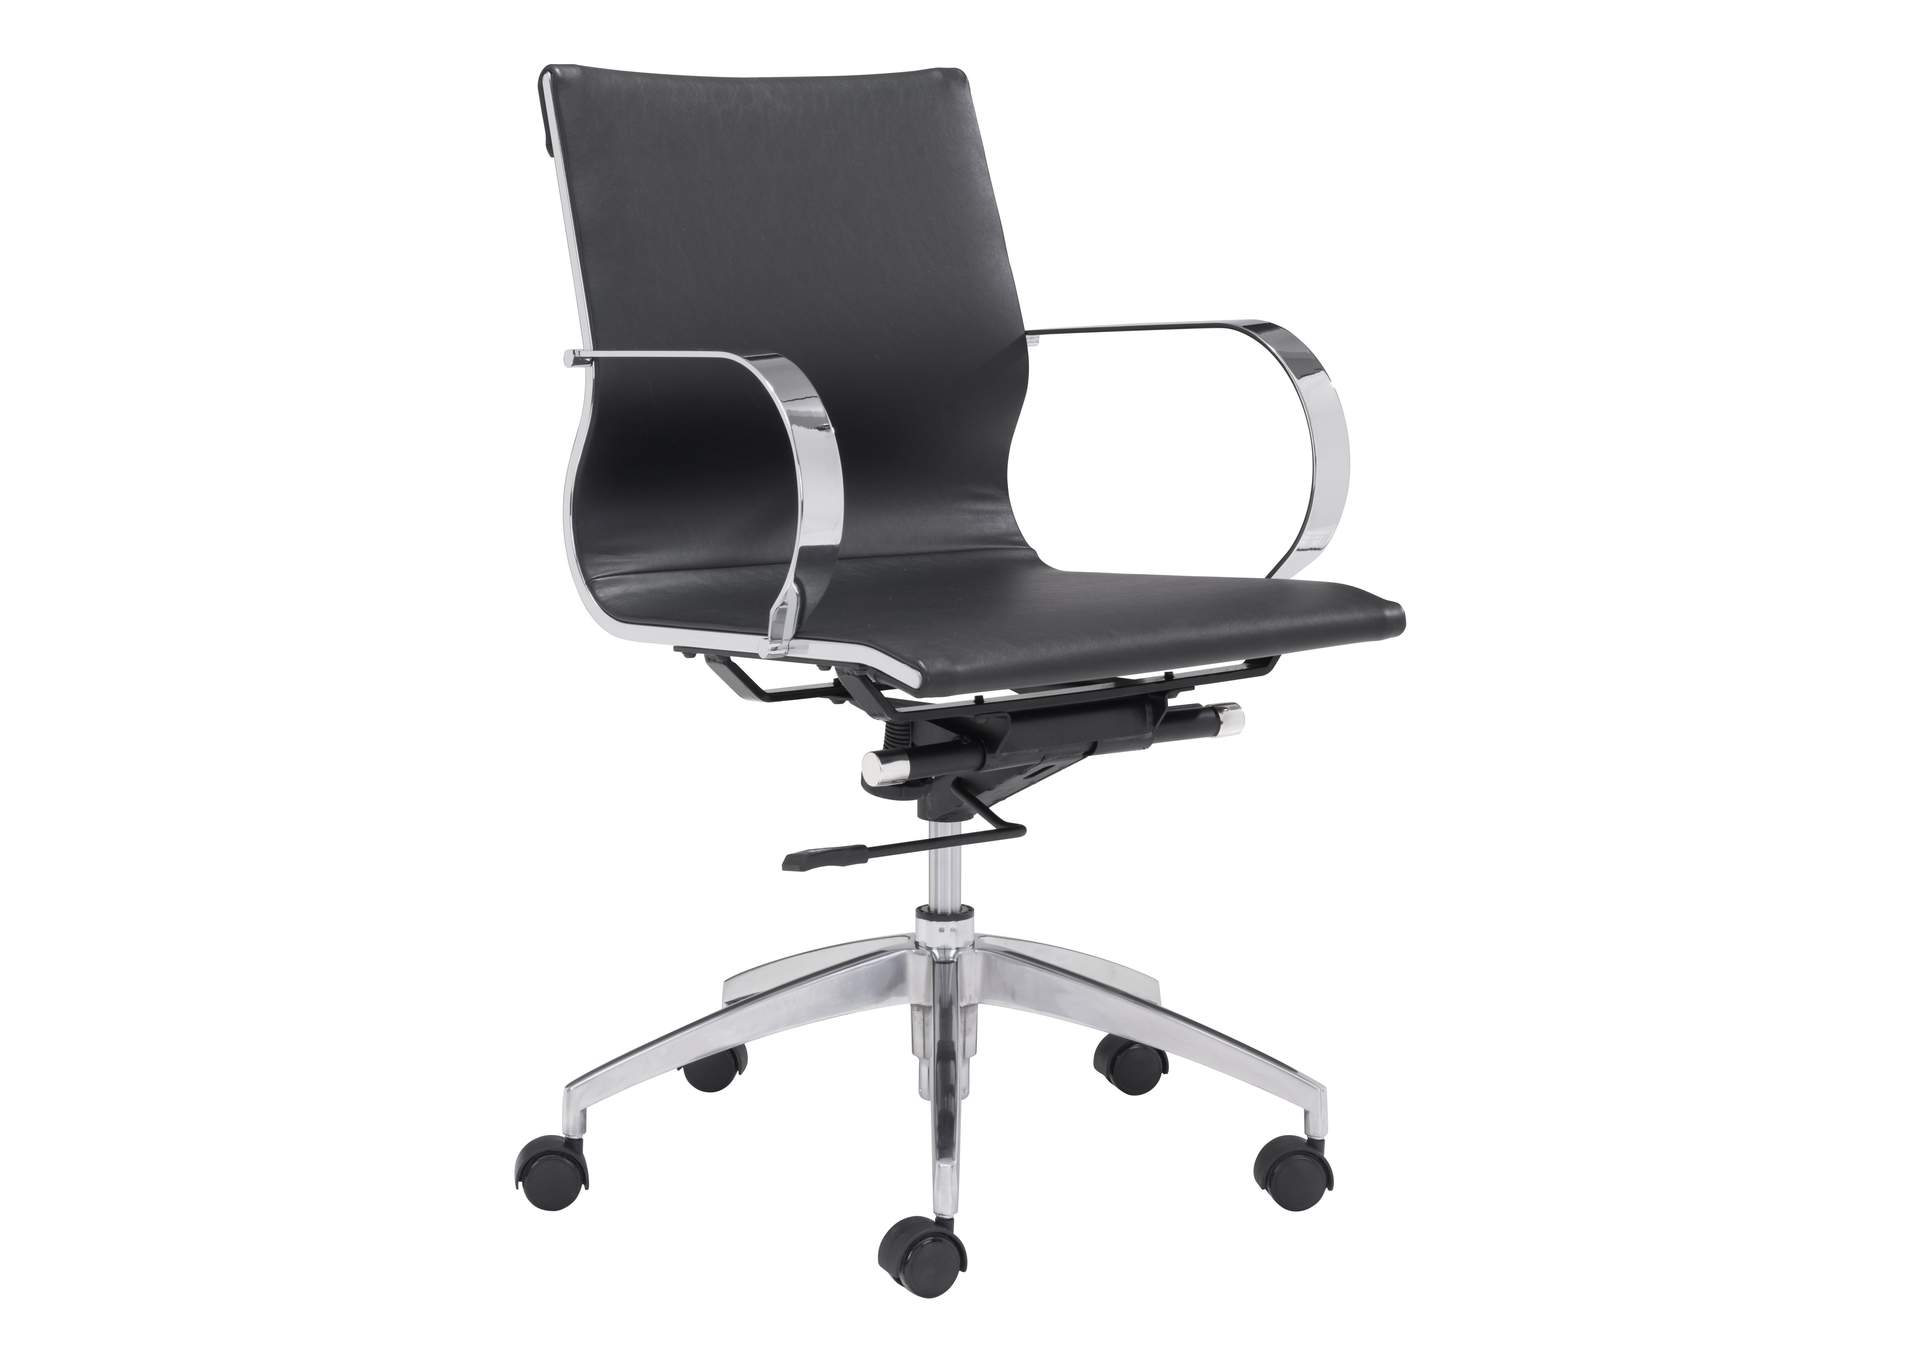 Glider Low Back Office Chair Black,Zuo